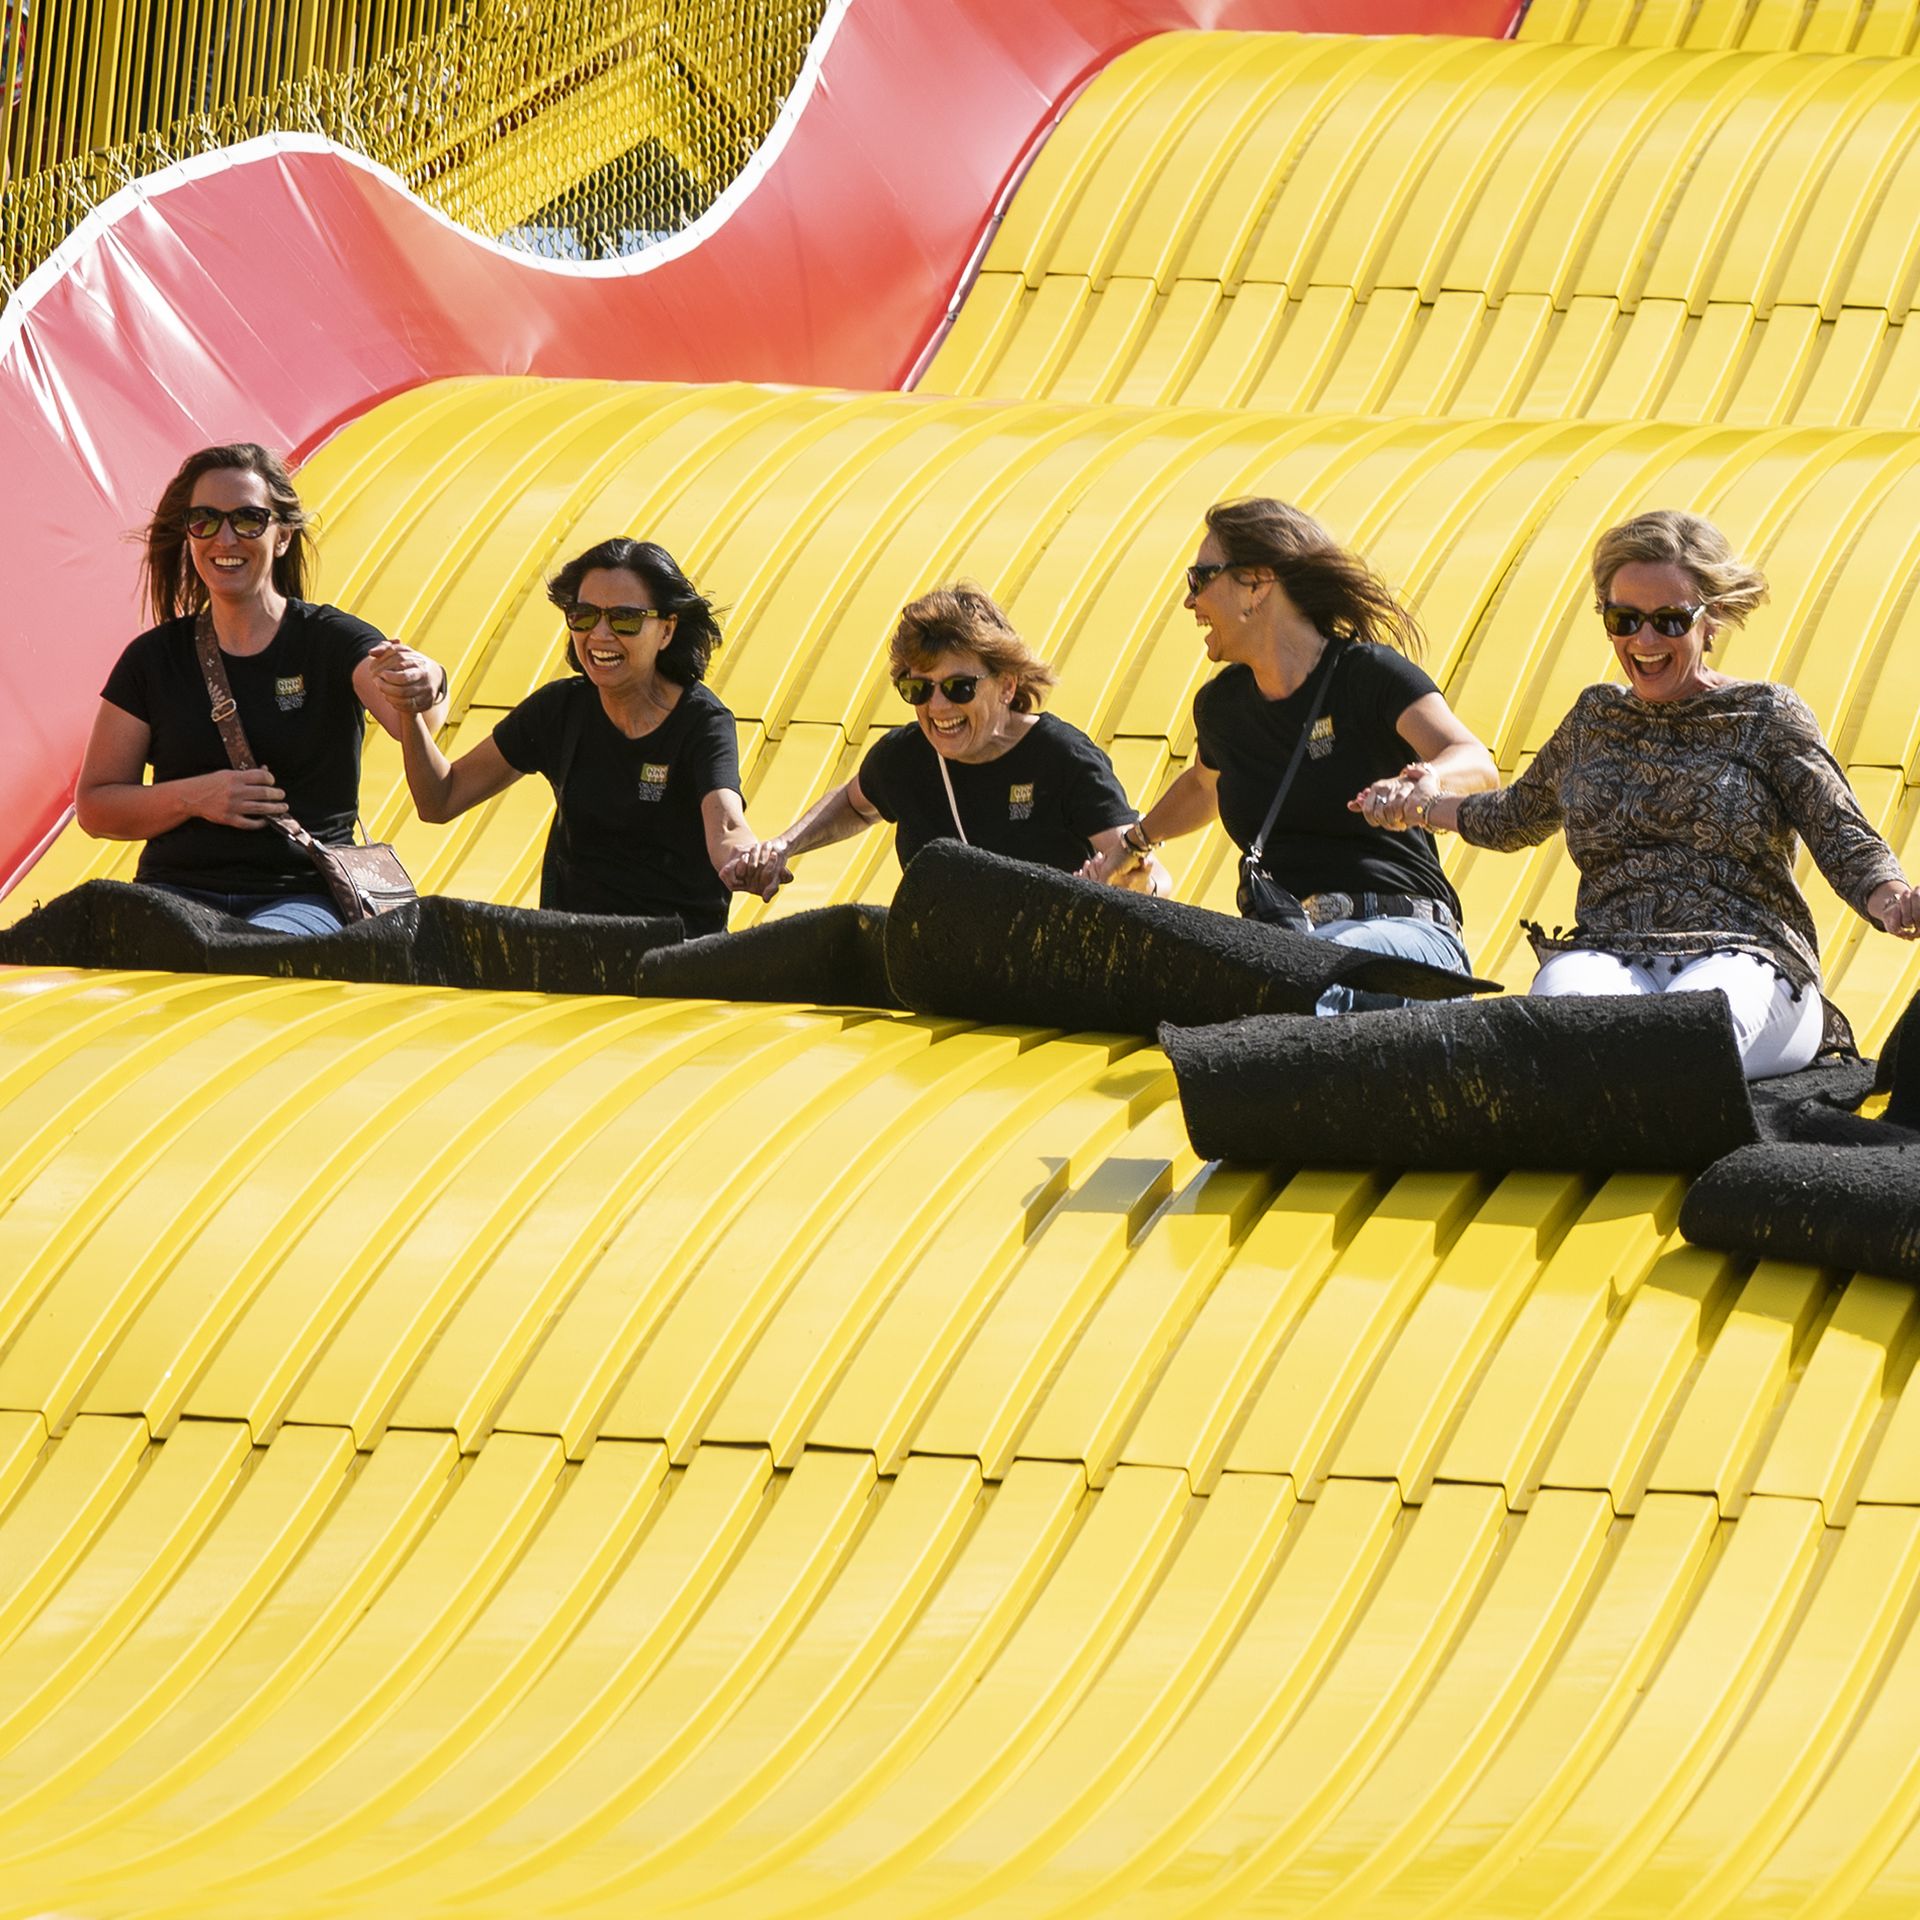 A group of ladies ride the Giant Slide together at the Minnesota State Fair 